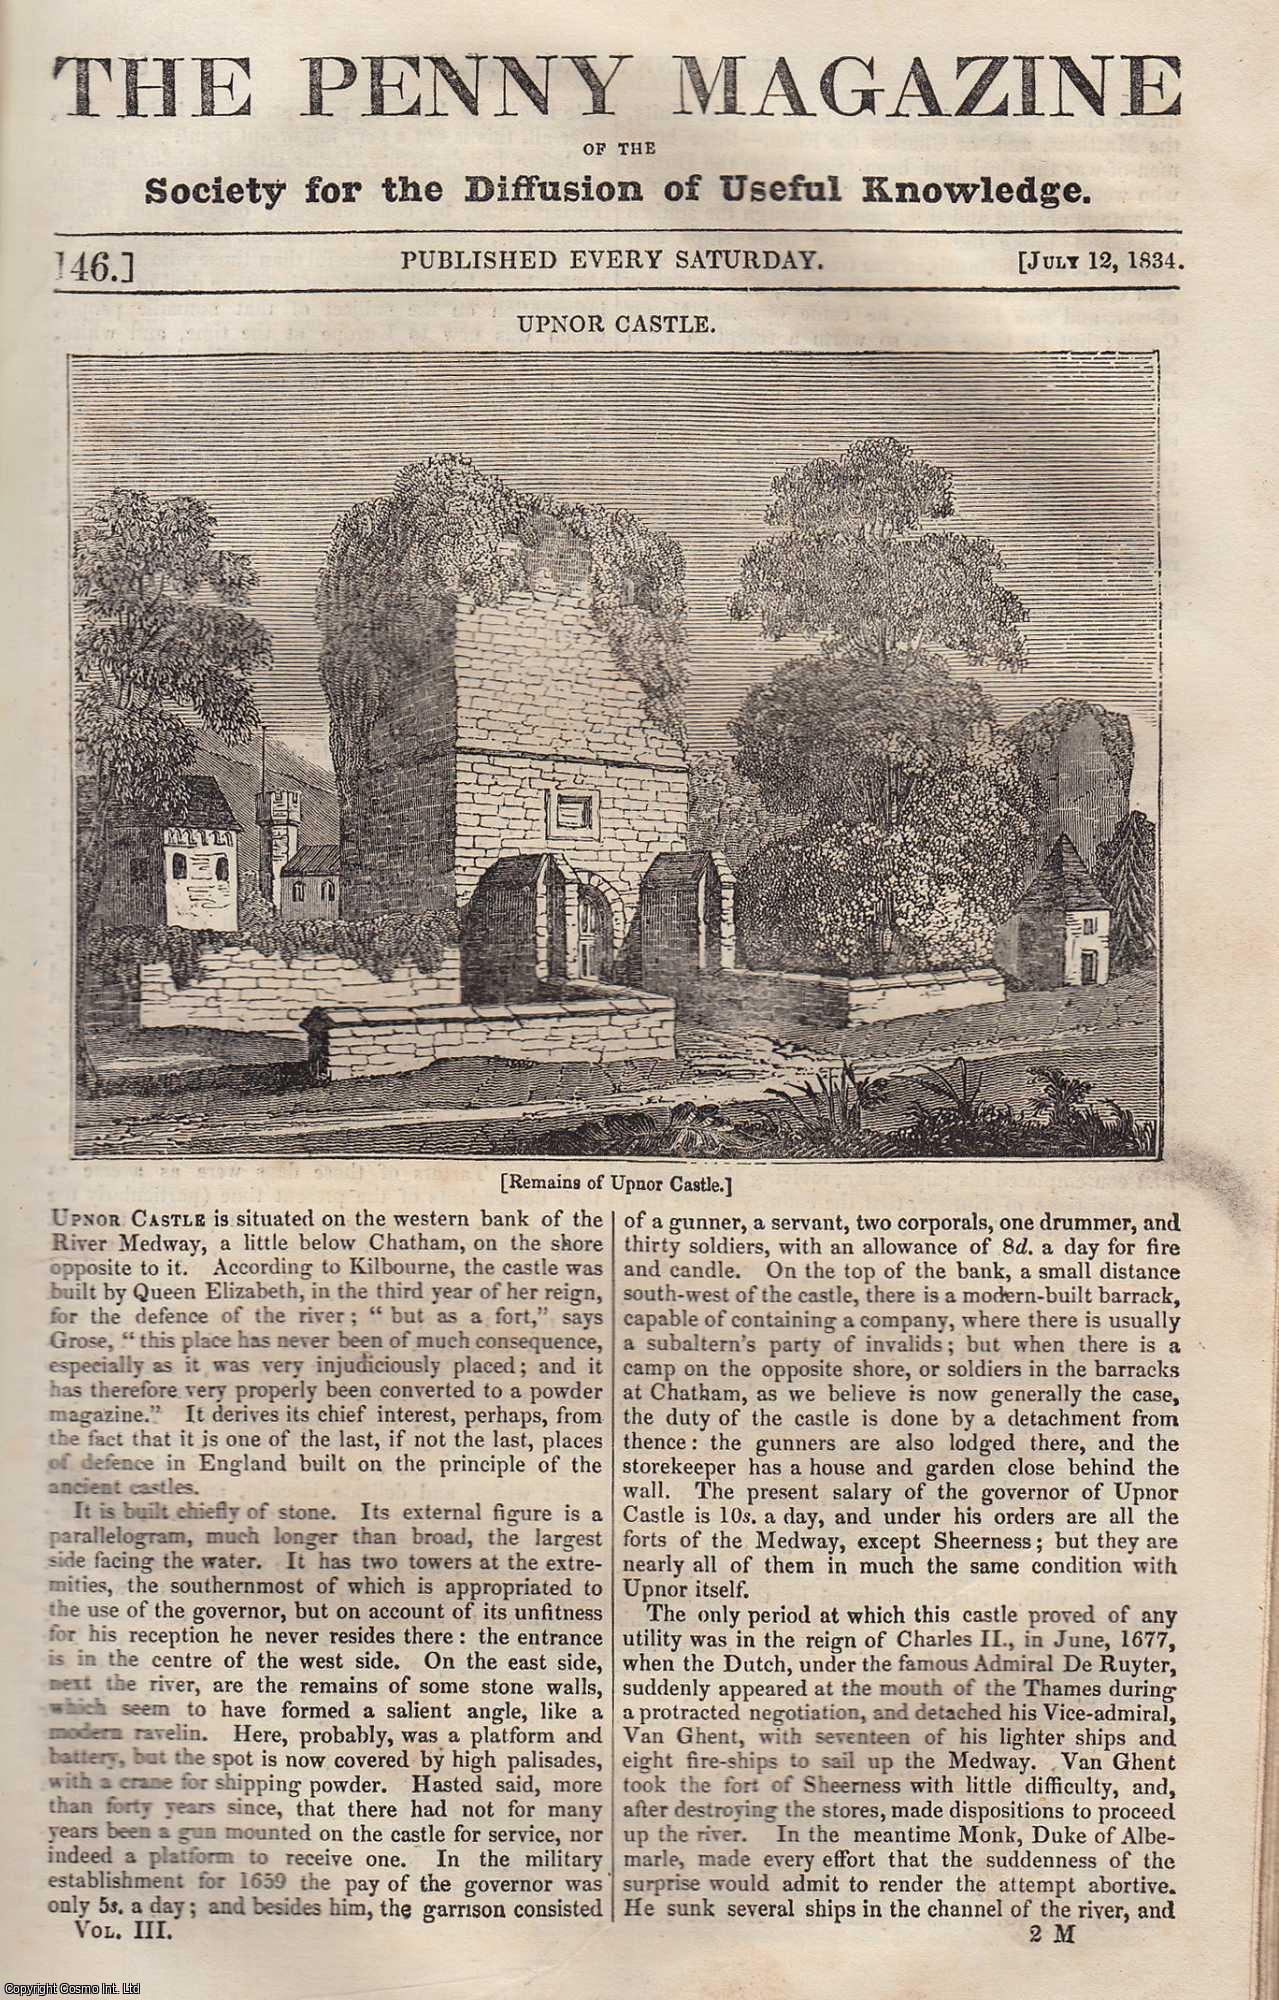 Penny Magazine - Upnor Castle (Kent); The Mammee-Tree (native of West Indies); The Fugger Family (bankers); The Cemetery of Pere La Chaise (Paris), etc. Issue No. 146, July 12th, 1834. A complete original weekly issue of the Penny Magazine, 1834.